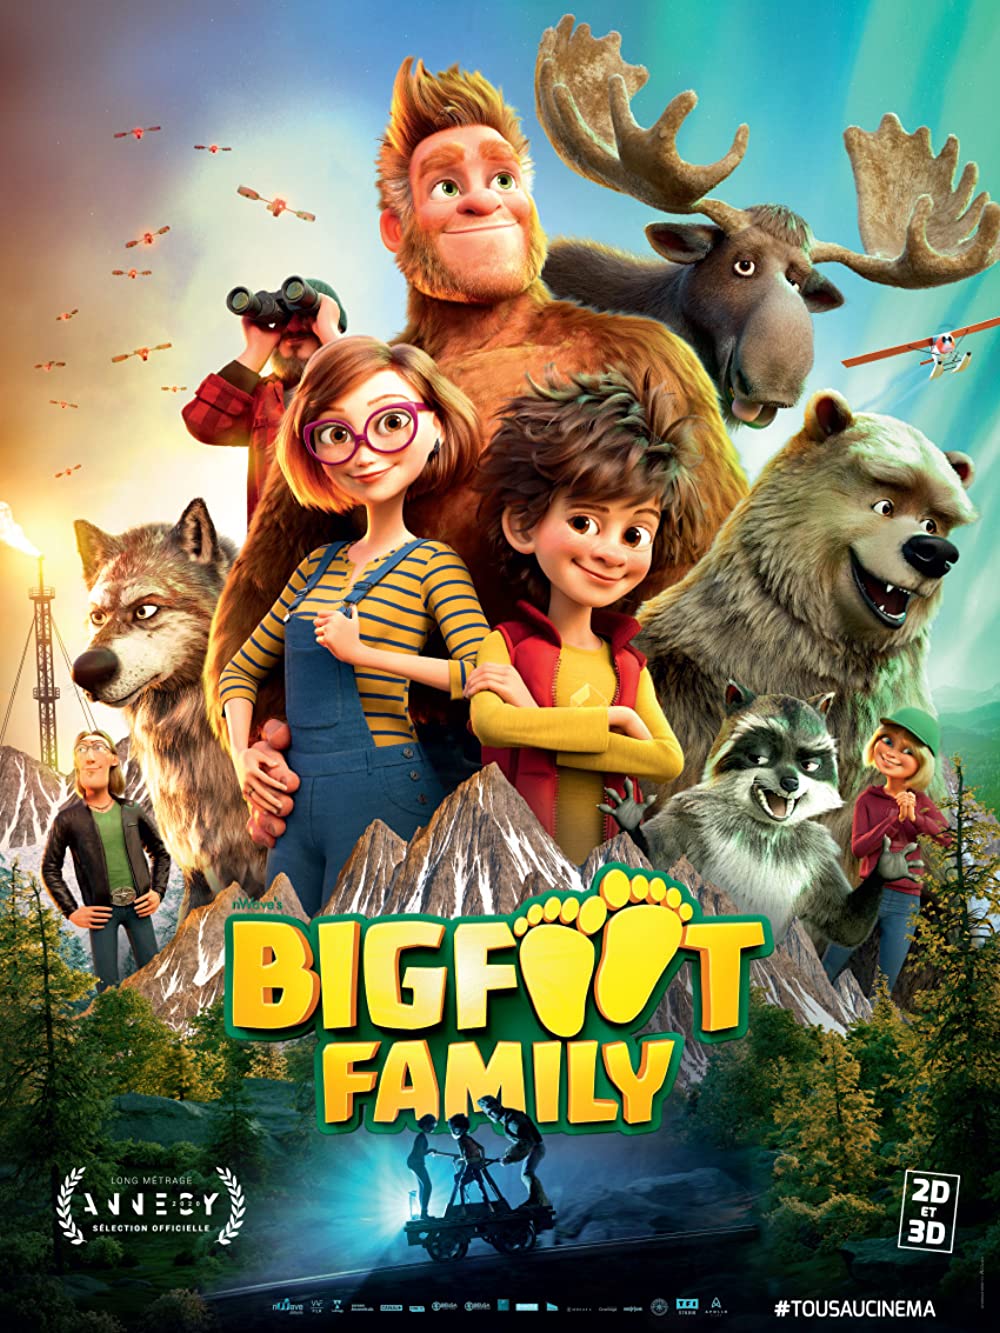 The Son Of Bigfoot Animation Movie Poster Wallpapers